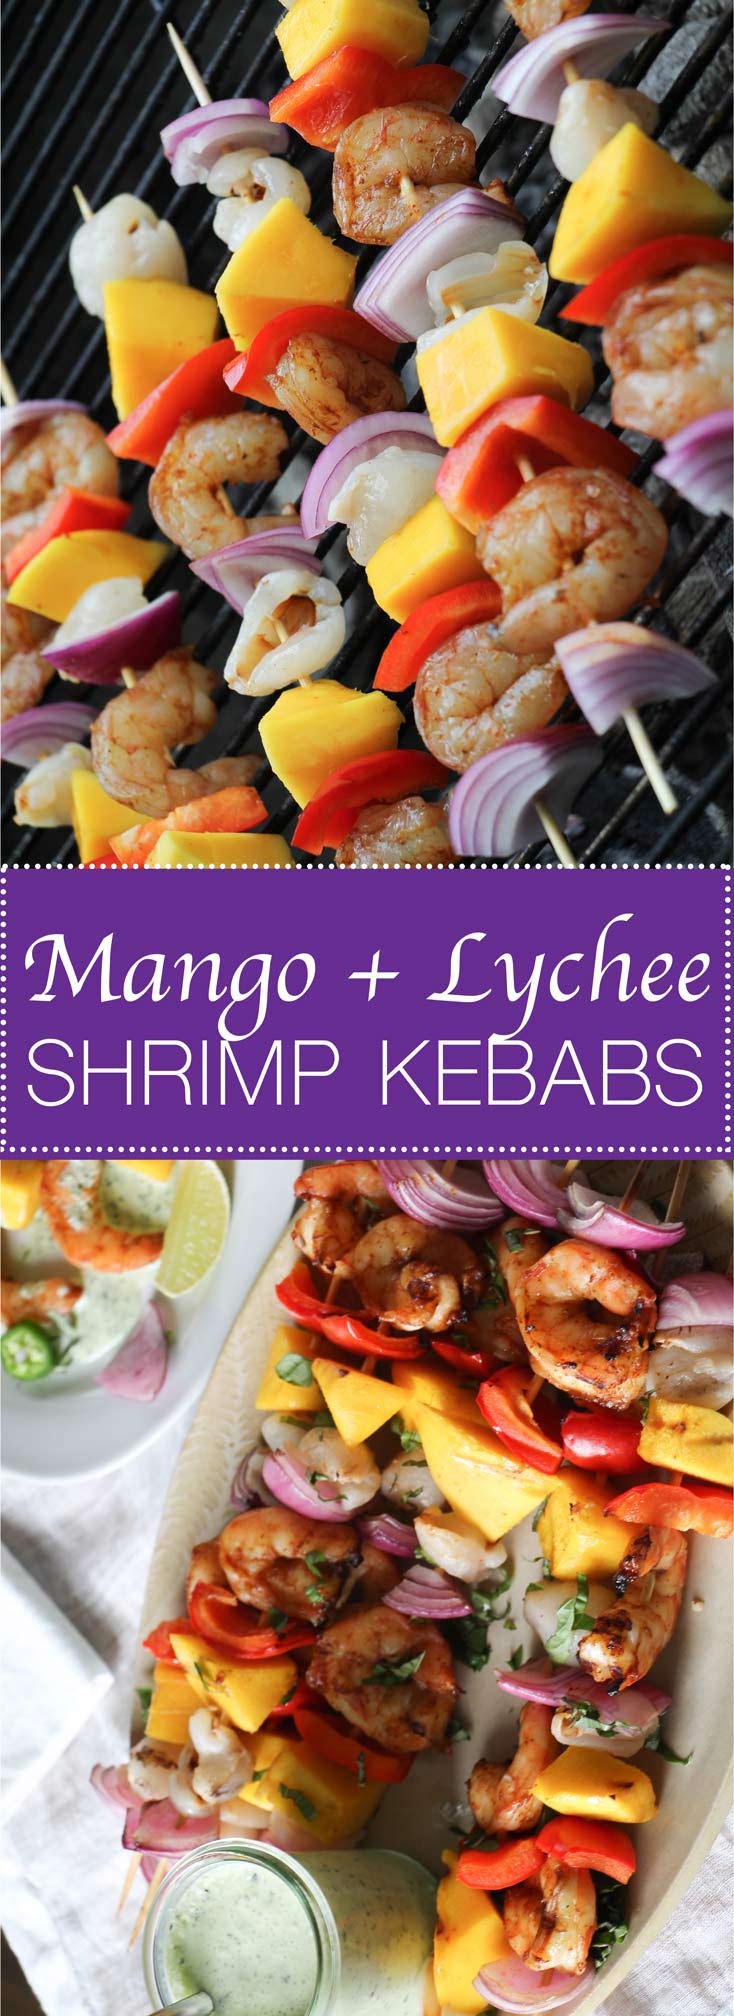 Mango & Lychee Shrimp Kebabs, sizzling off the grill, served with green goddess dip.  Big, juicy, tropical flavors!